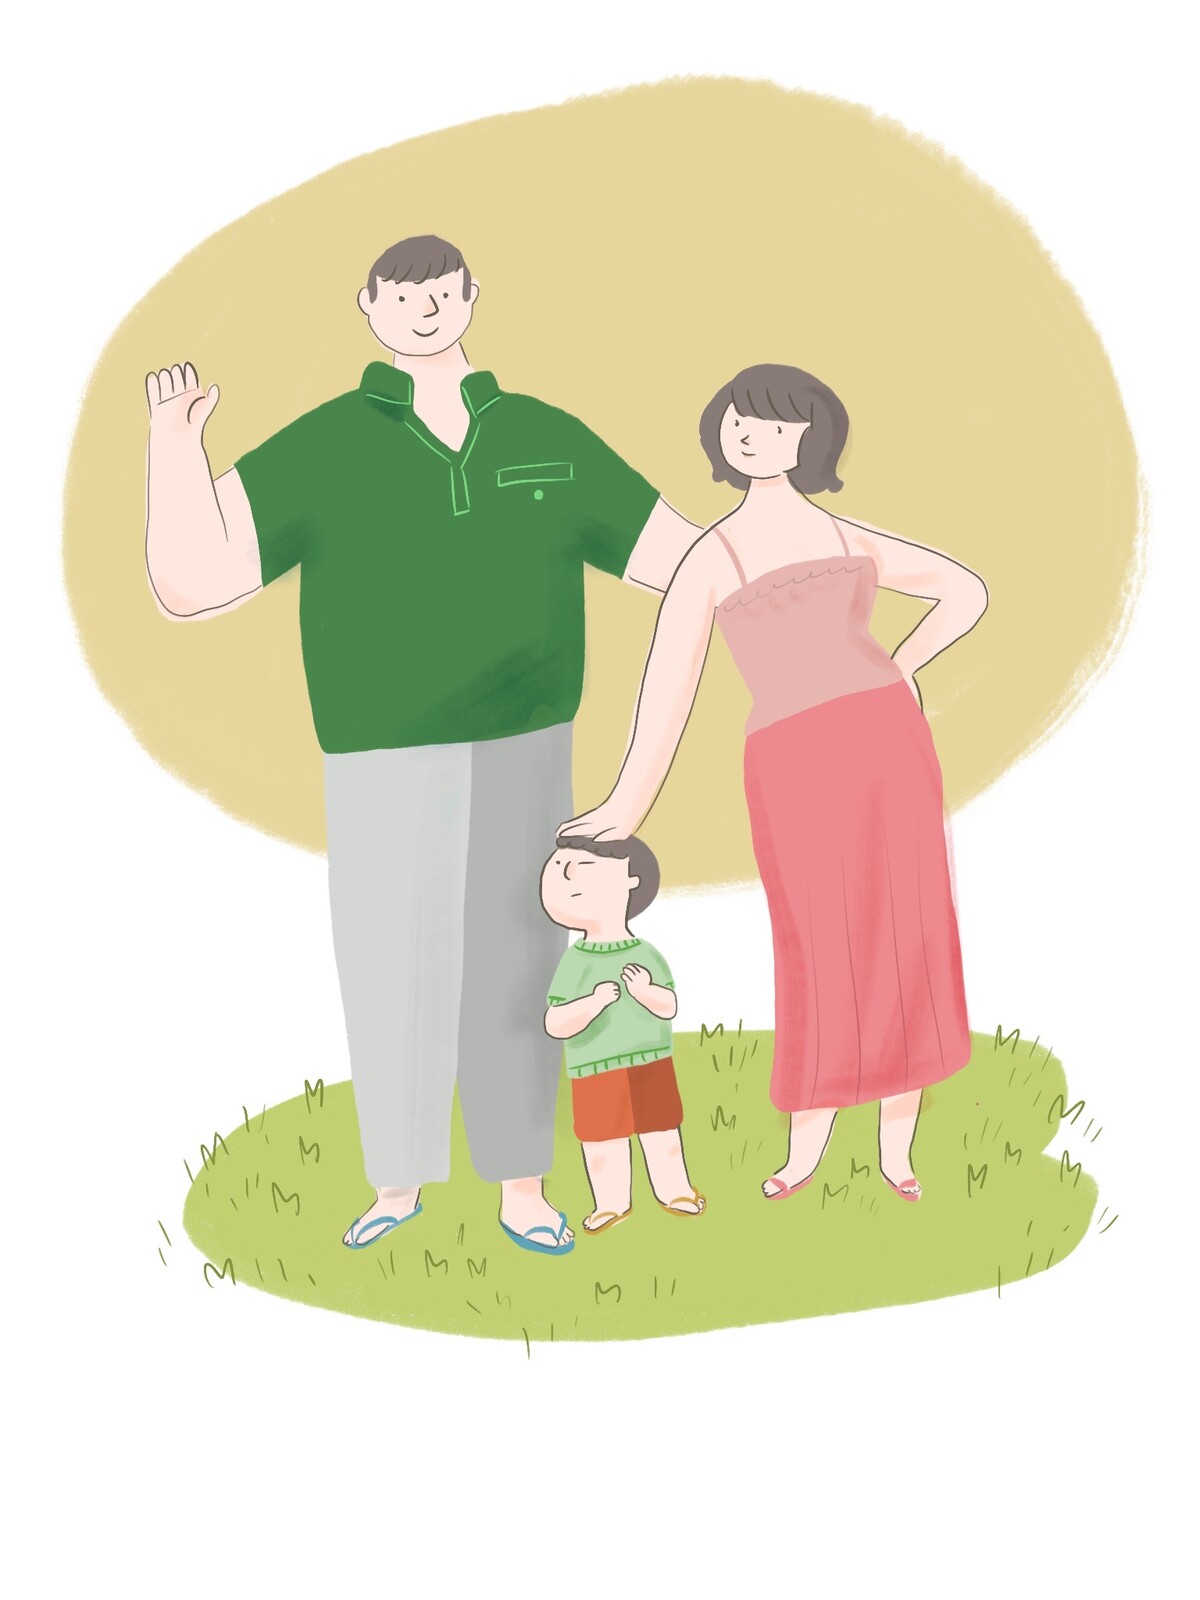 Style test for the image of the family